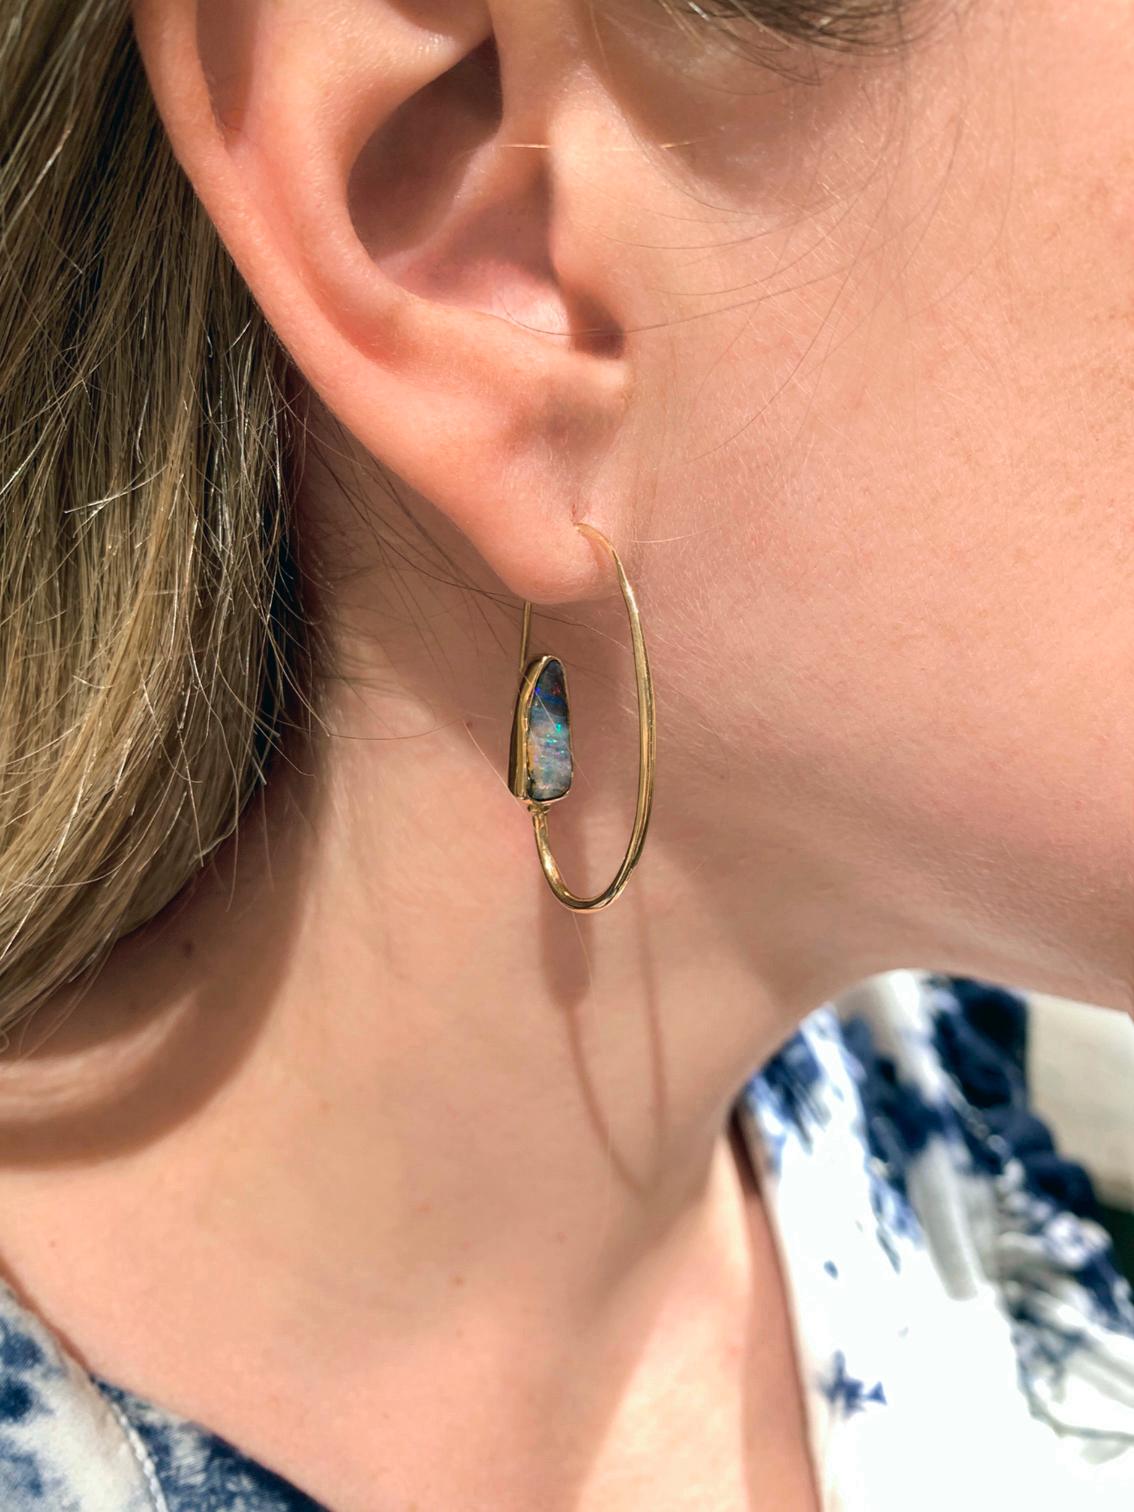 One of a Kind Opal Back Hoop Earrings by jewelry designer Julie Romanenko featuring a pair of beautiful elongated and curved natural Australian opals bezel -set in high-polished 14k yellow gold with a unique front-to-back design.


About the Maker -